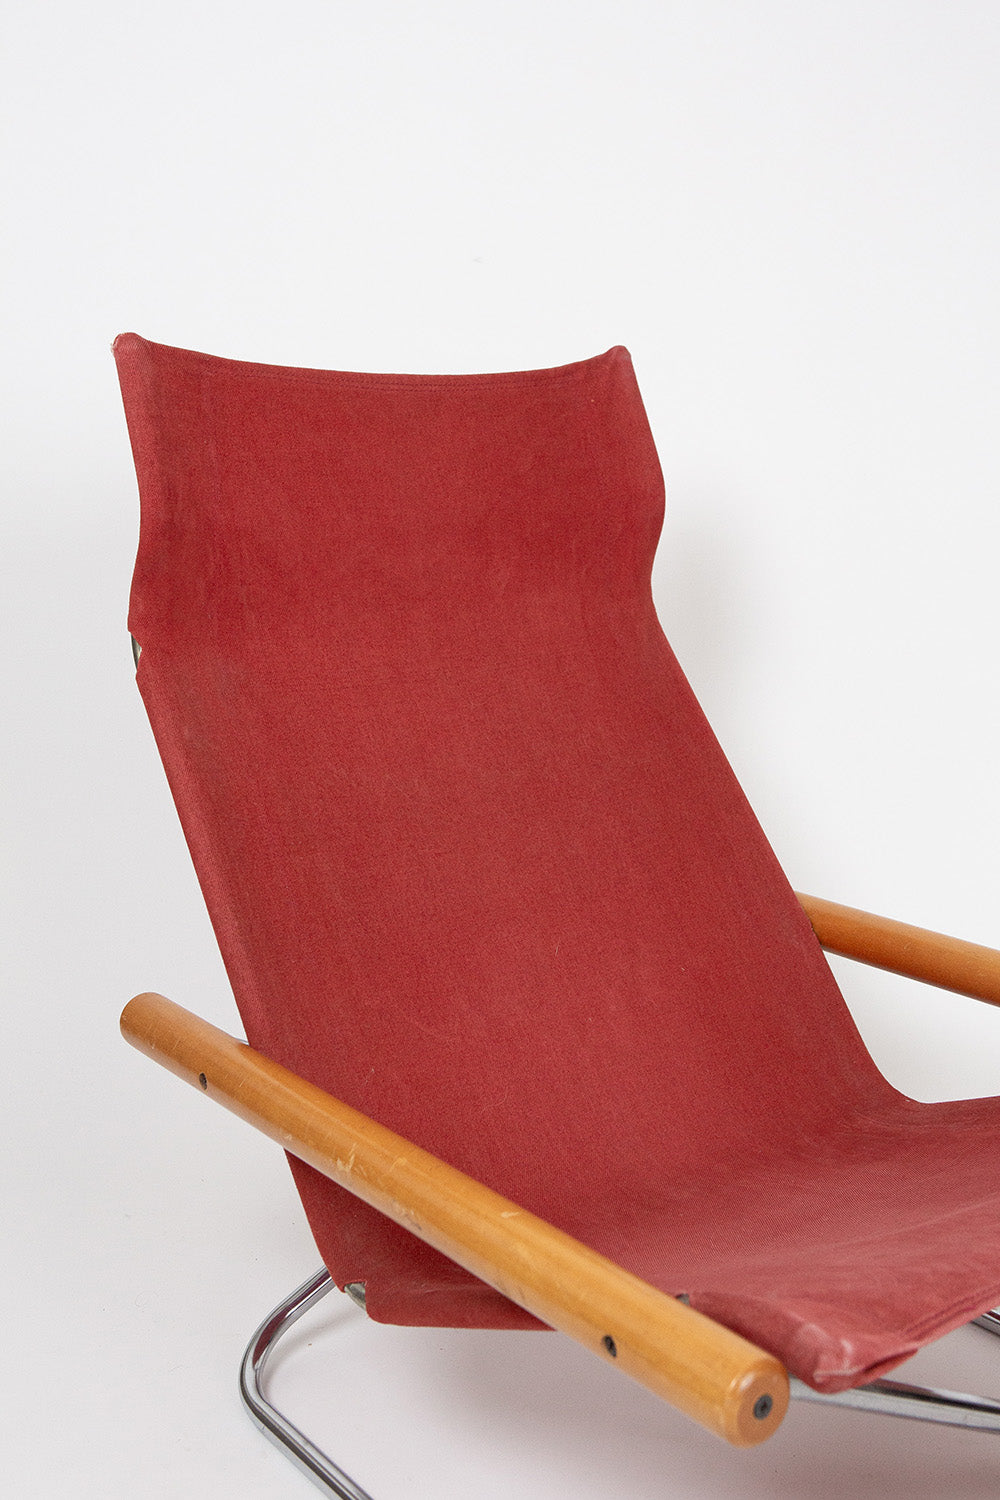 NY Folding Chair And Ottoman By Takeshi Nii, Japan C. 1950's/'60s